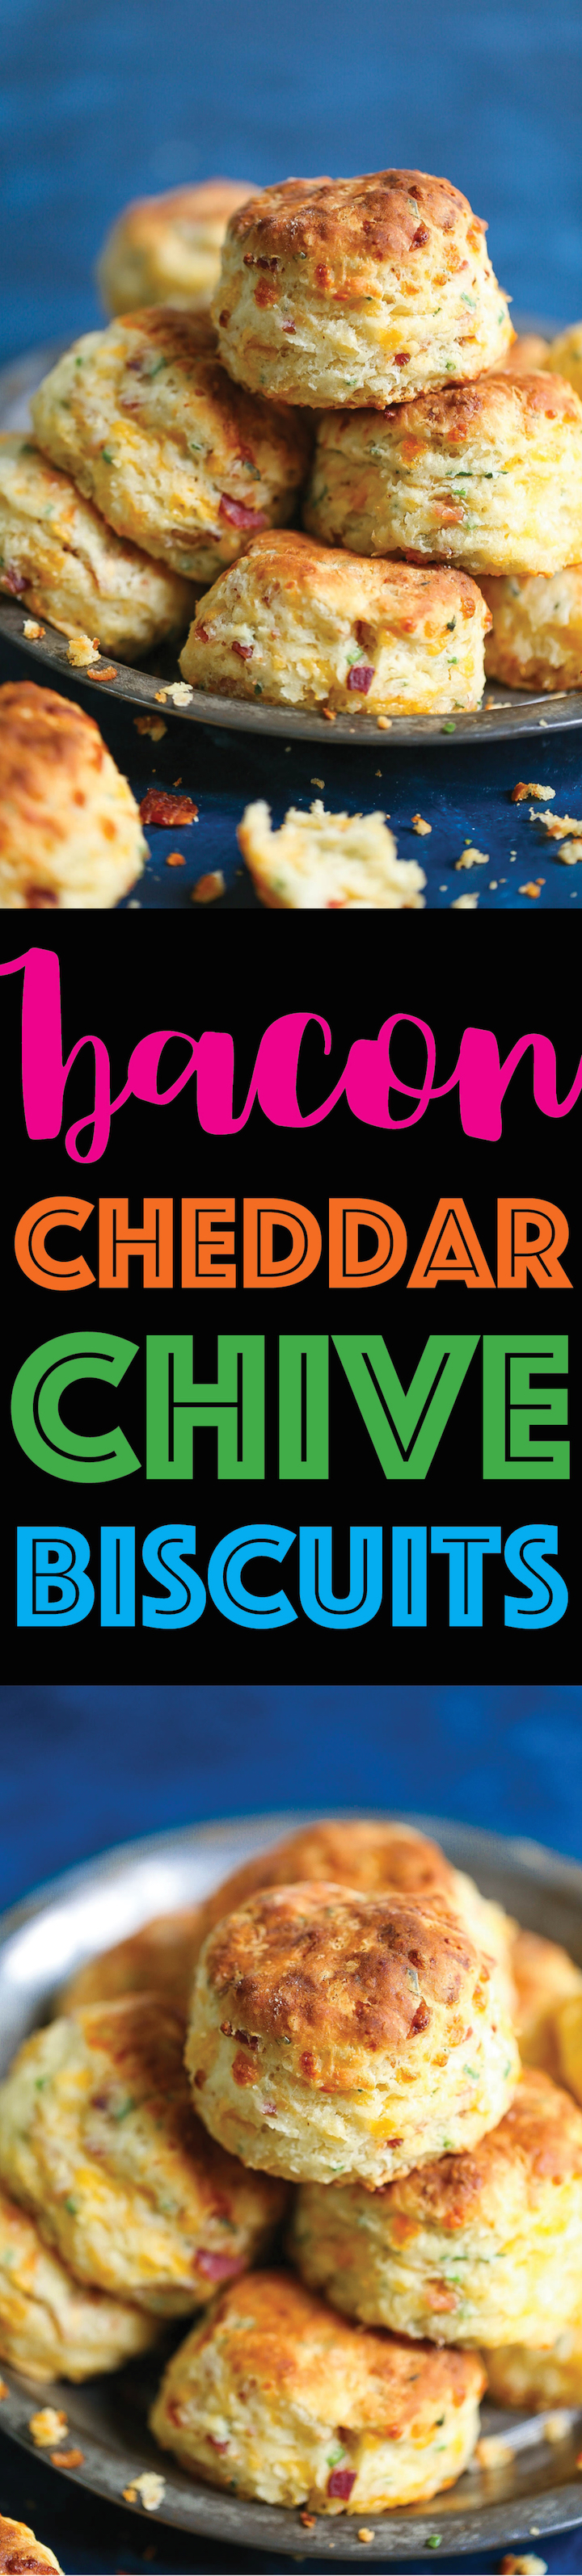 Bacon Cheddar Chive Biscuit Recipe